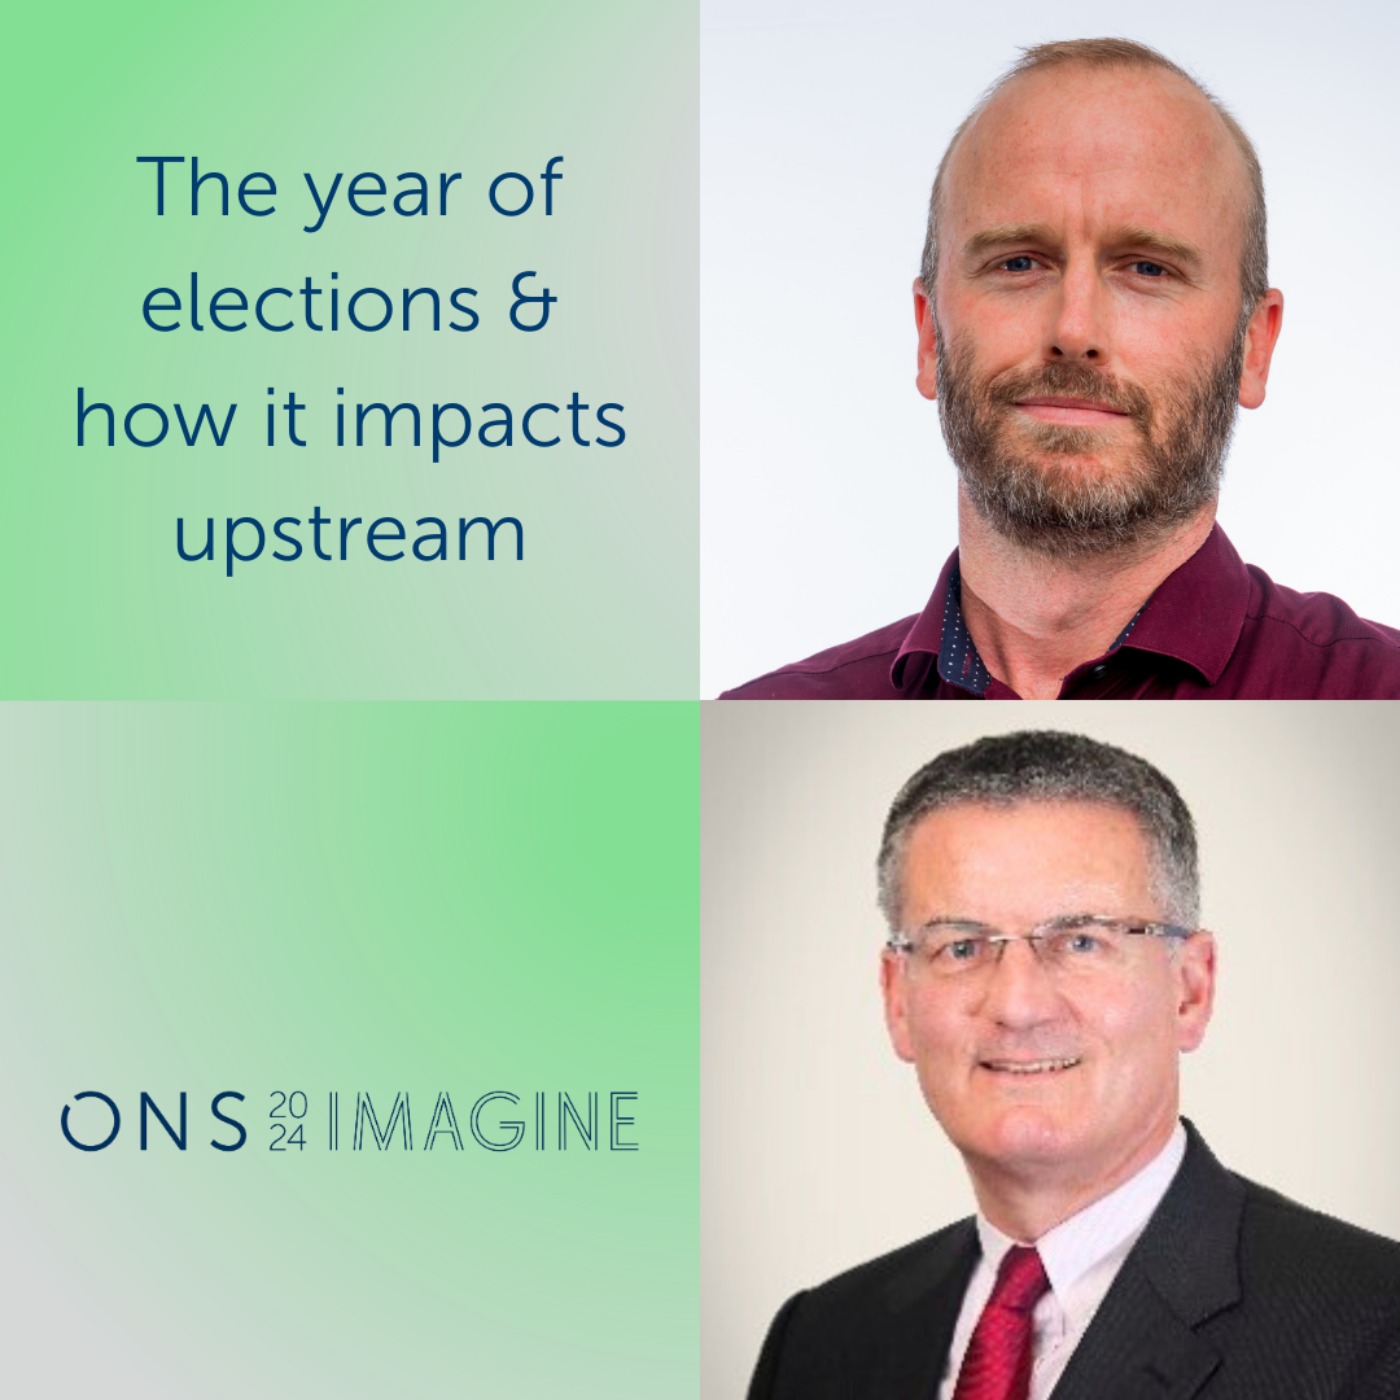 The year of elections & how it impacts upstream